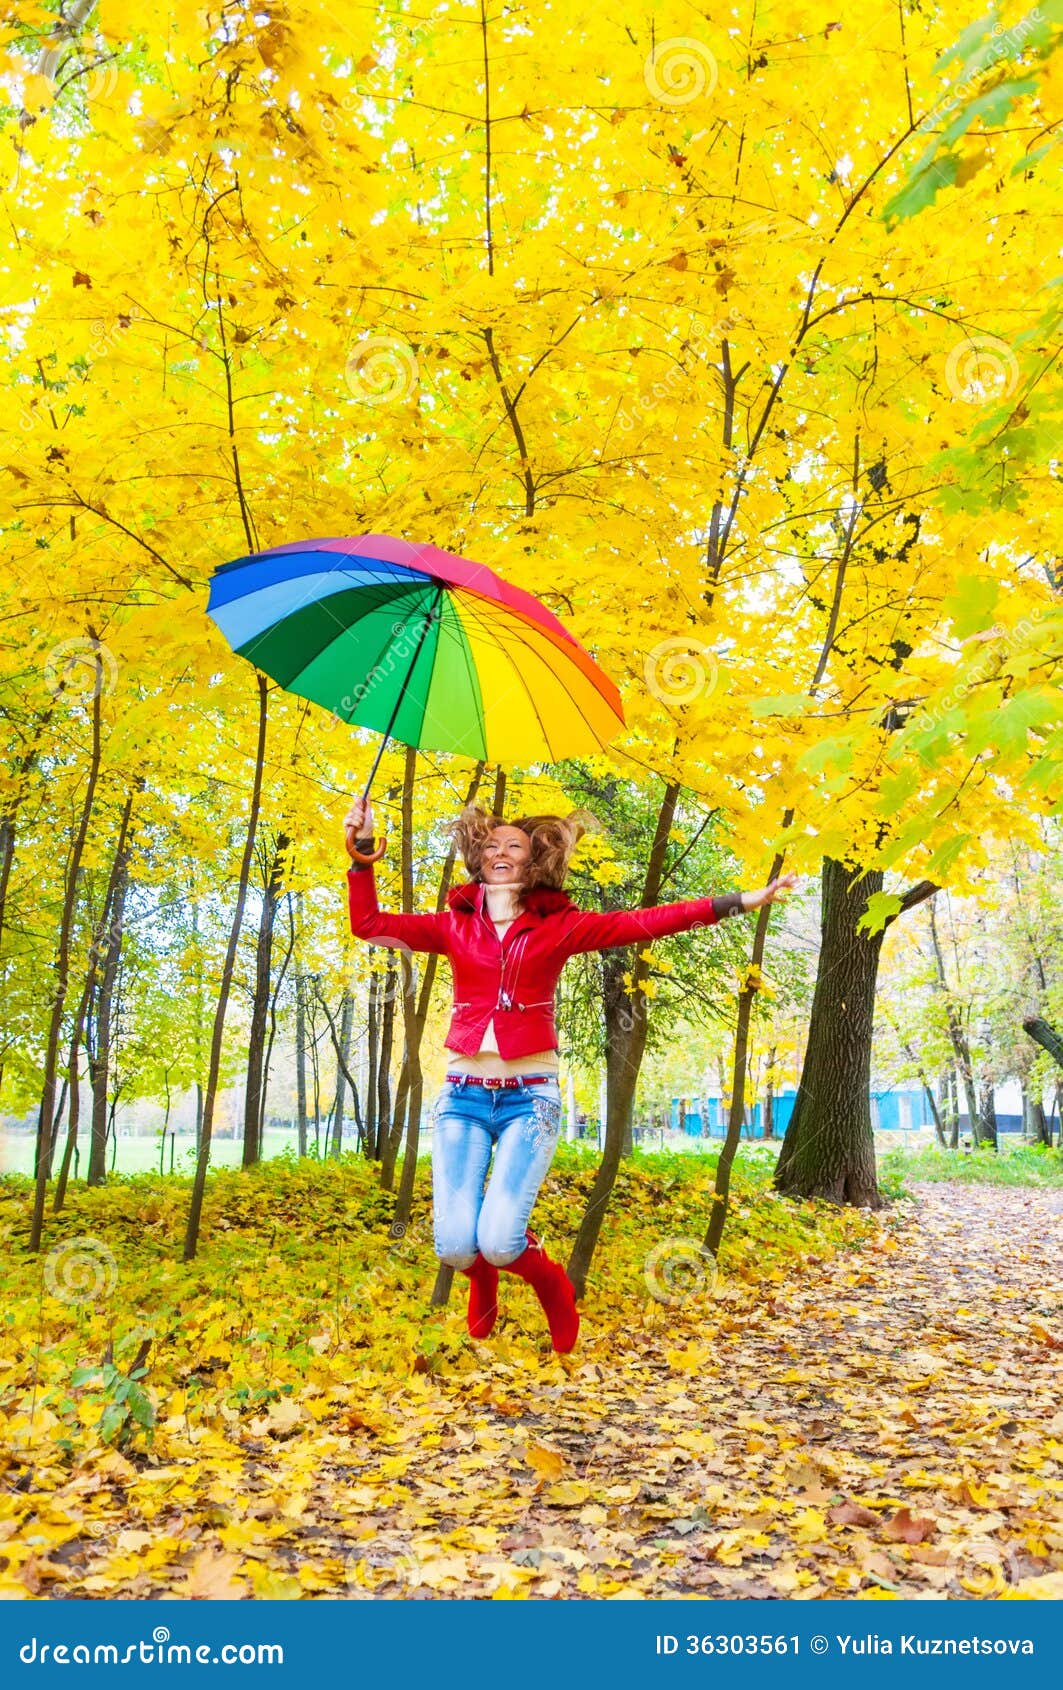 Pretty Girl With Colorful Umbrella Jumping In Autumn Park Stock Image